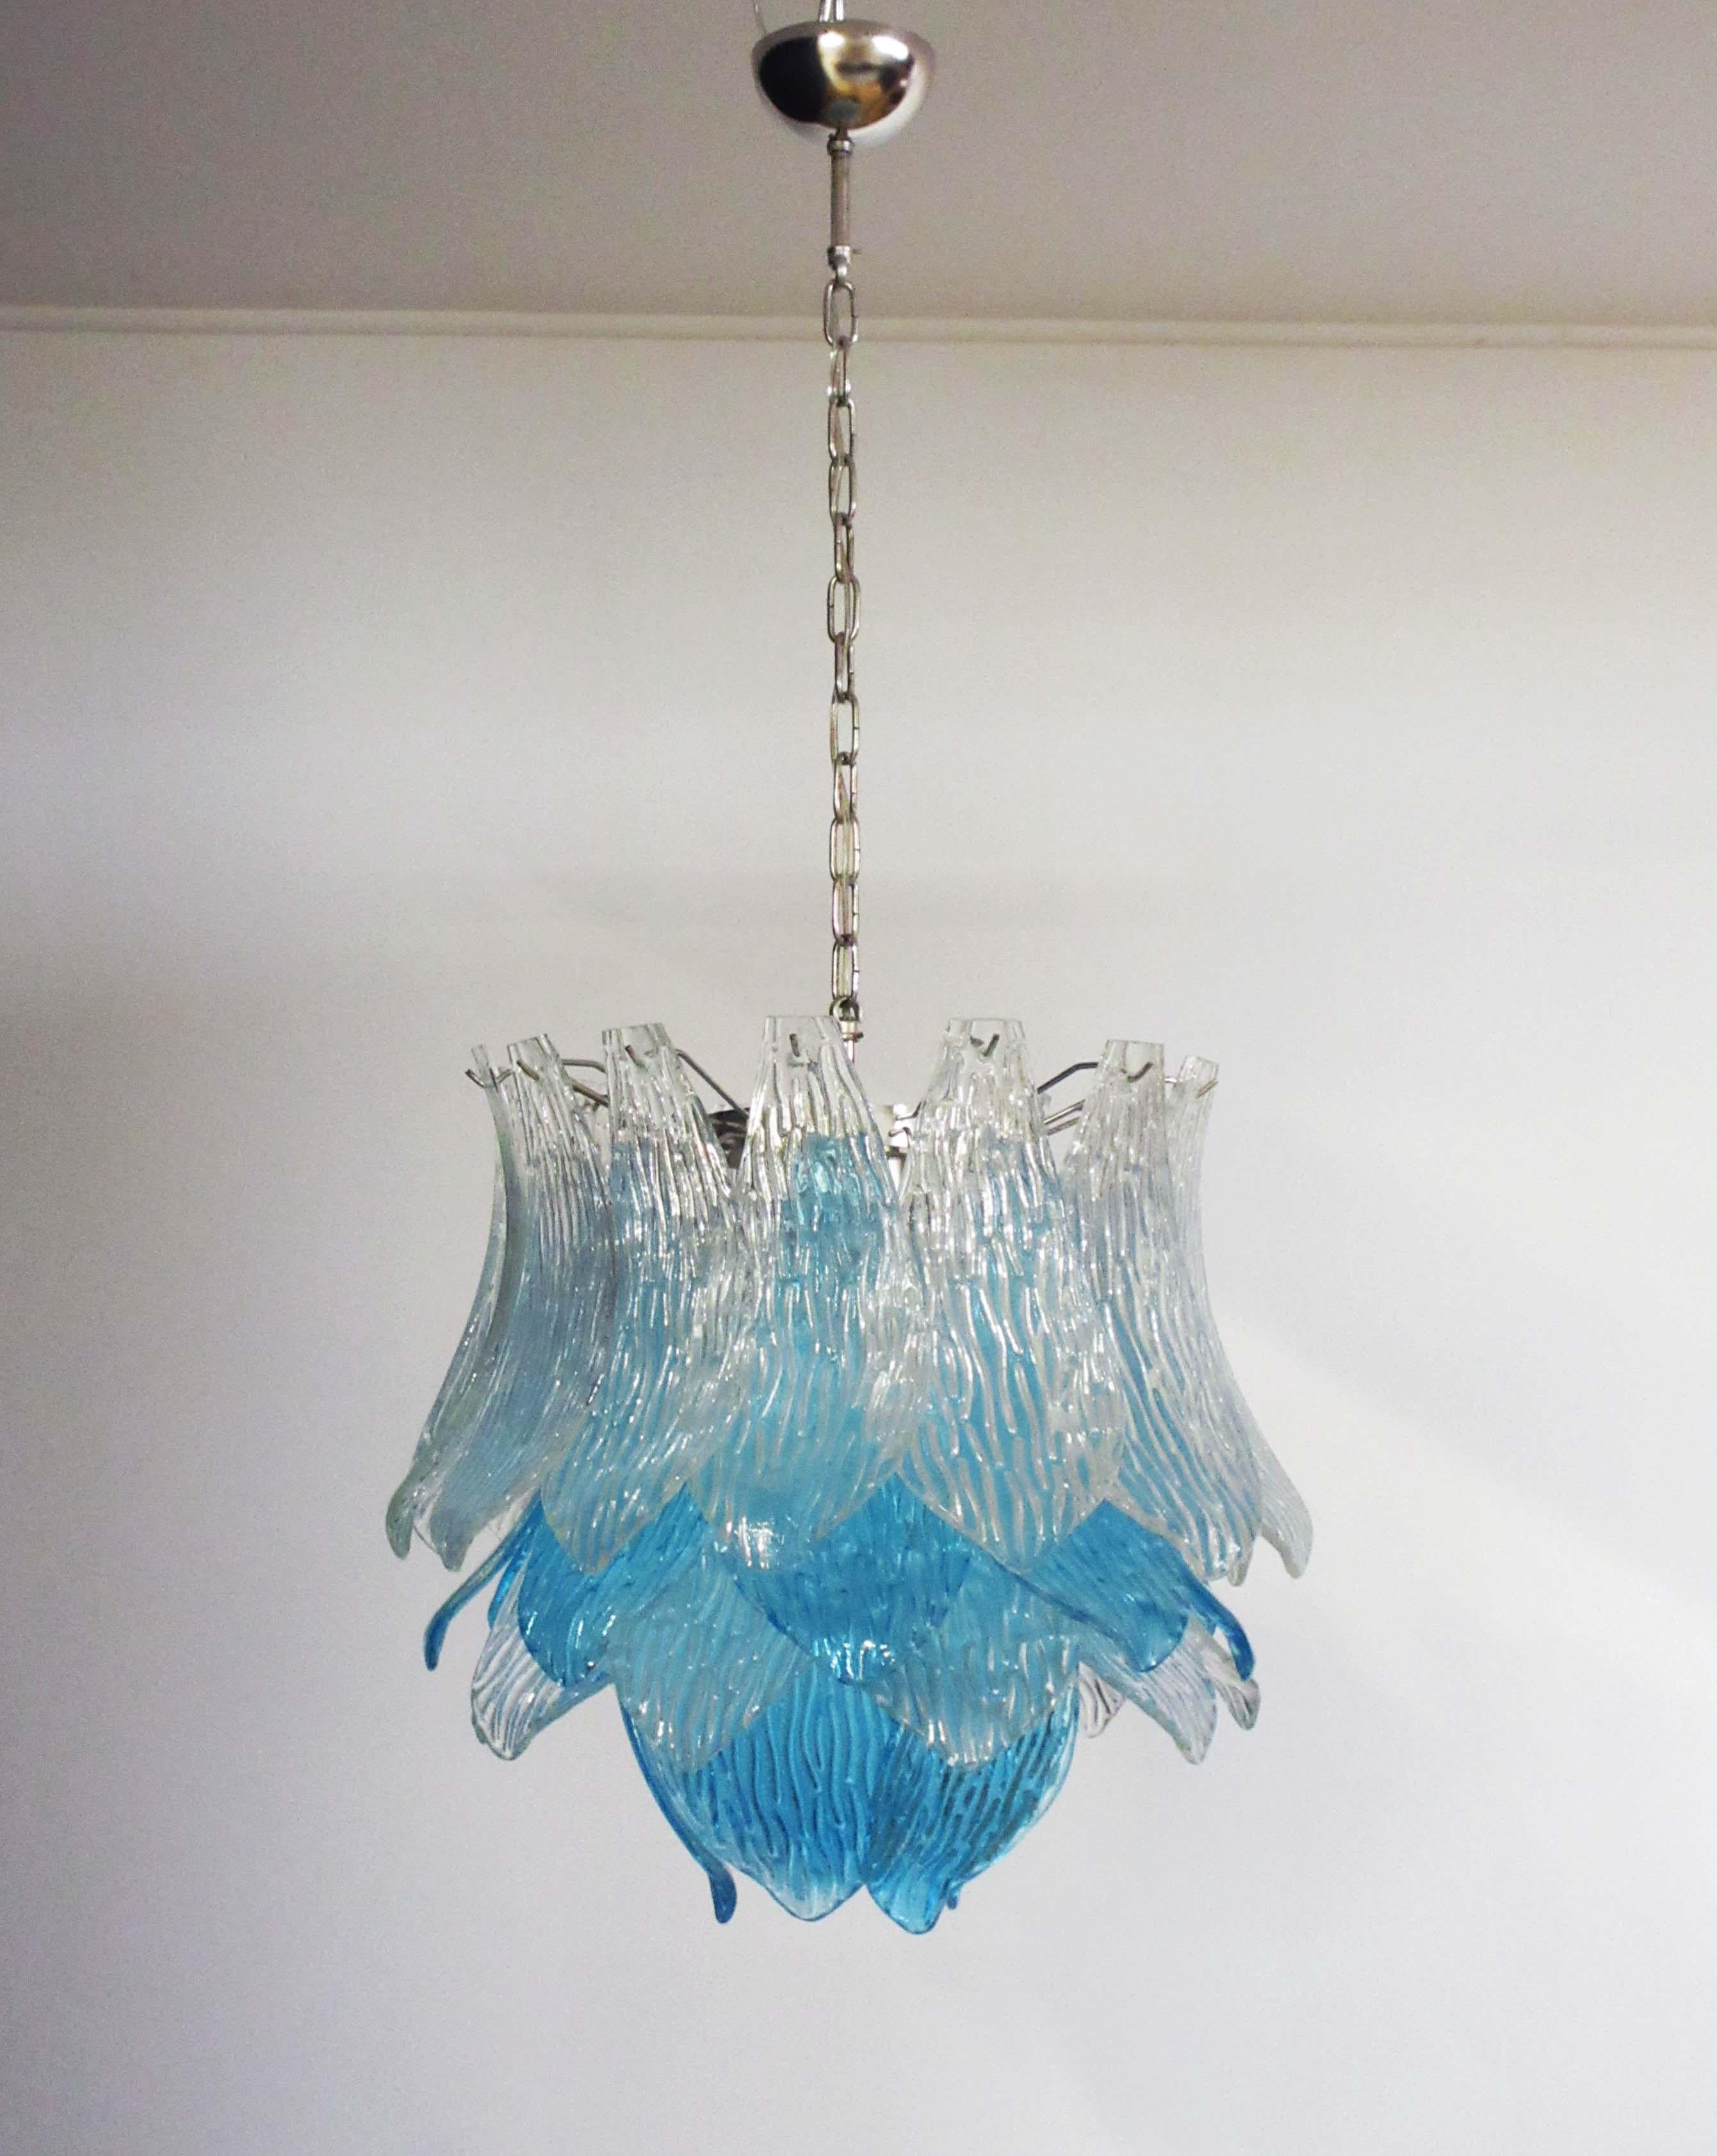 Talian Vintage Murano Glass Chandelier, 38 Glasses, Blue and Trasparent 5